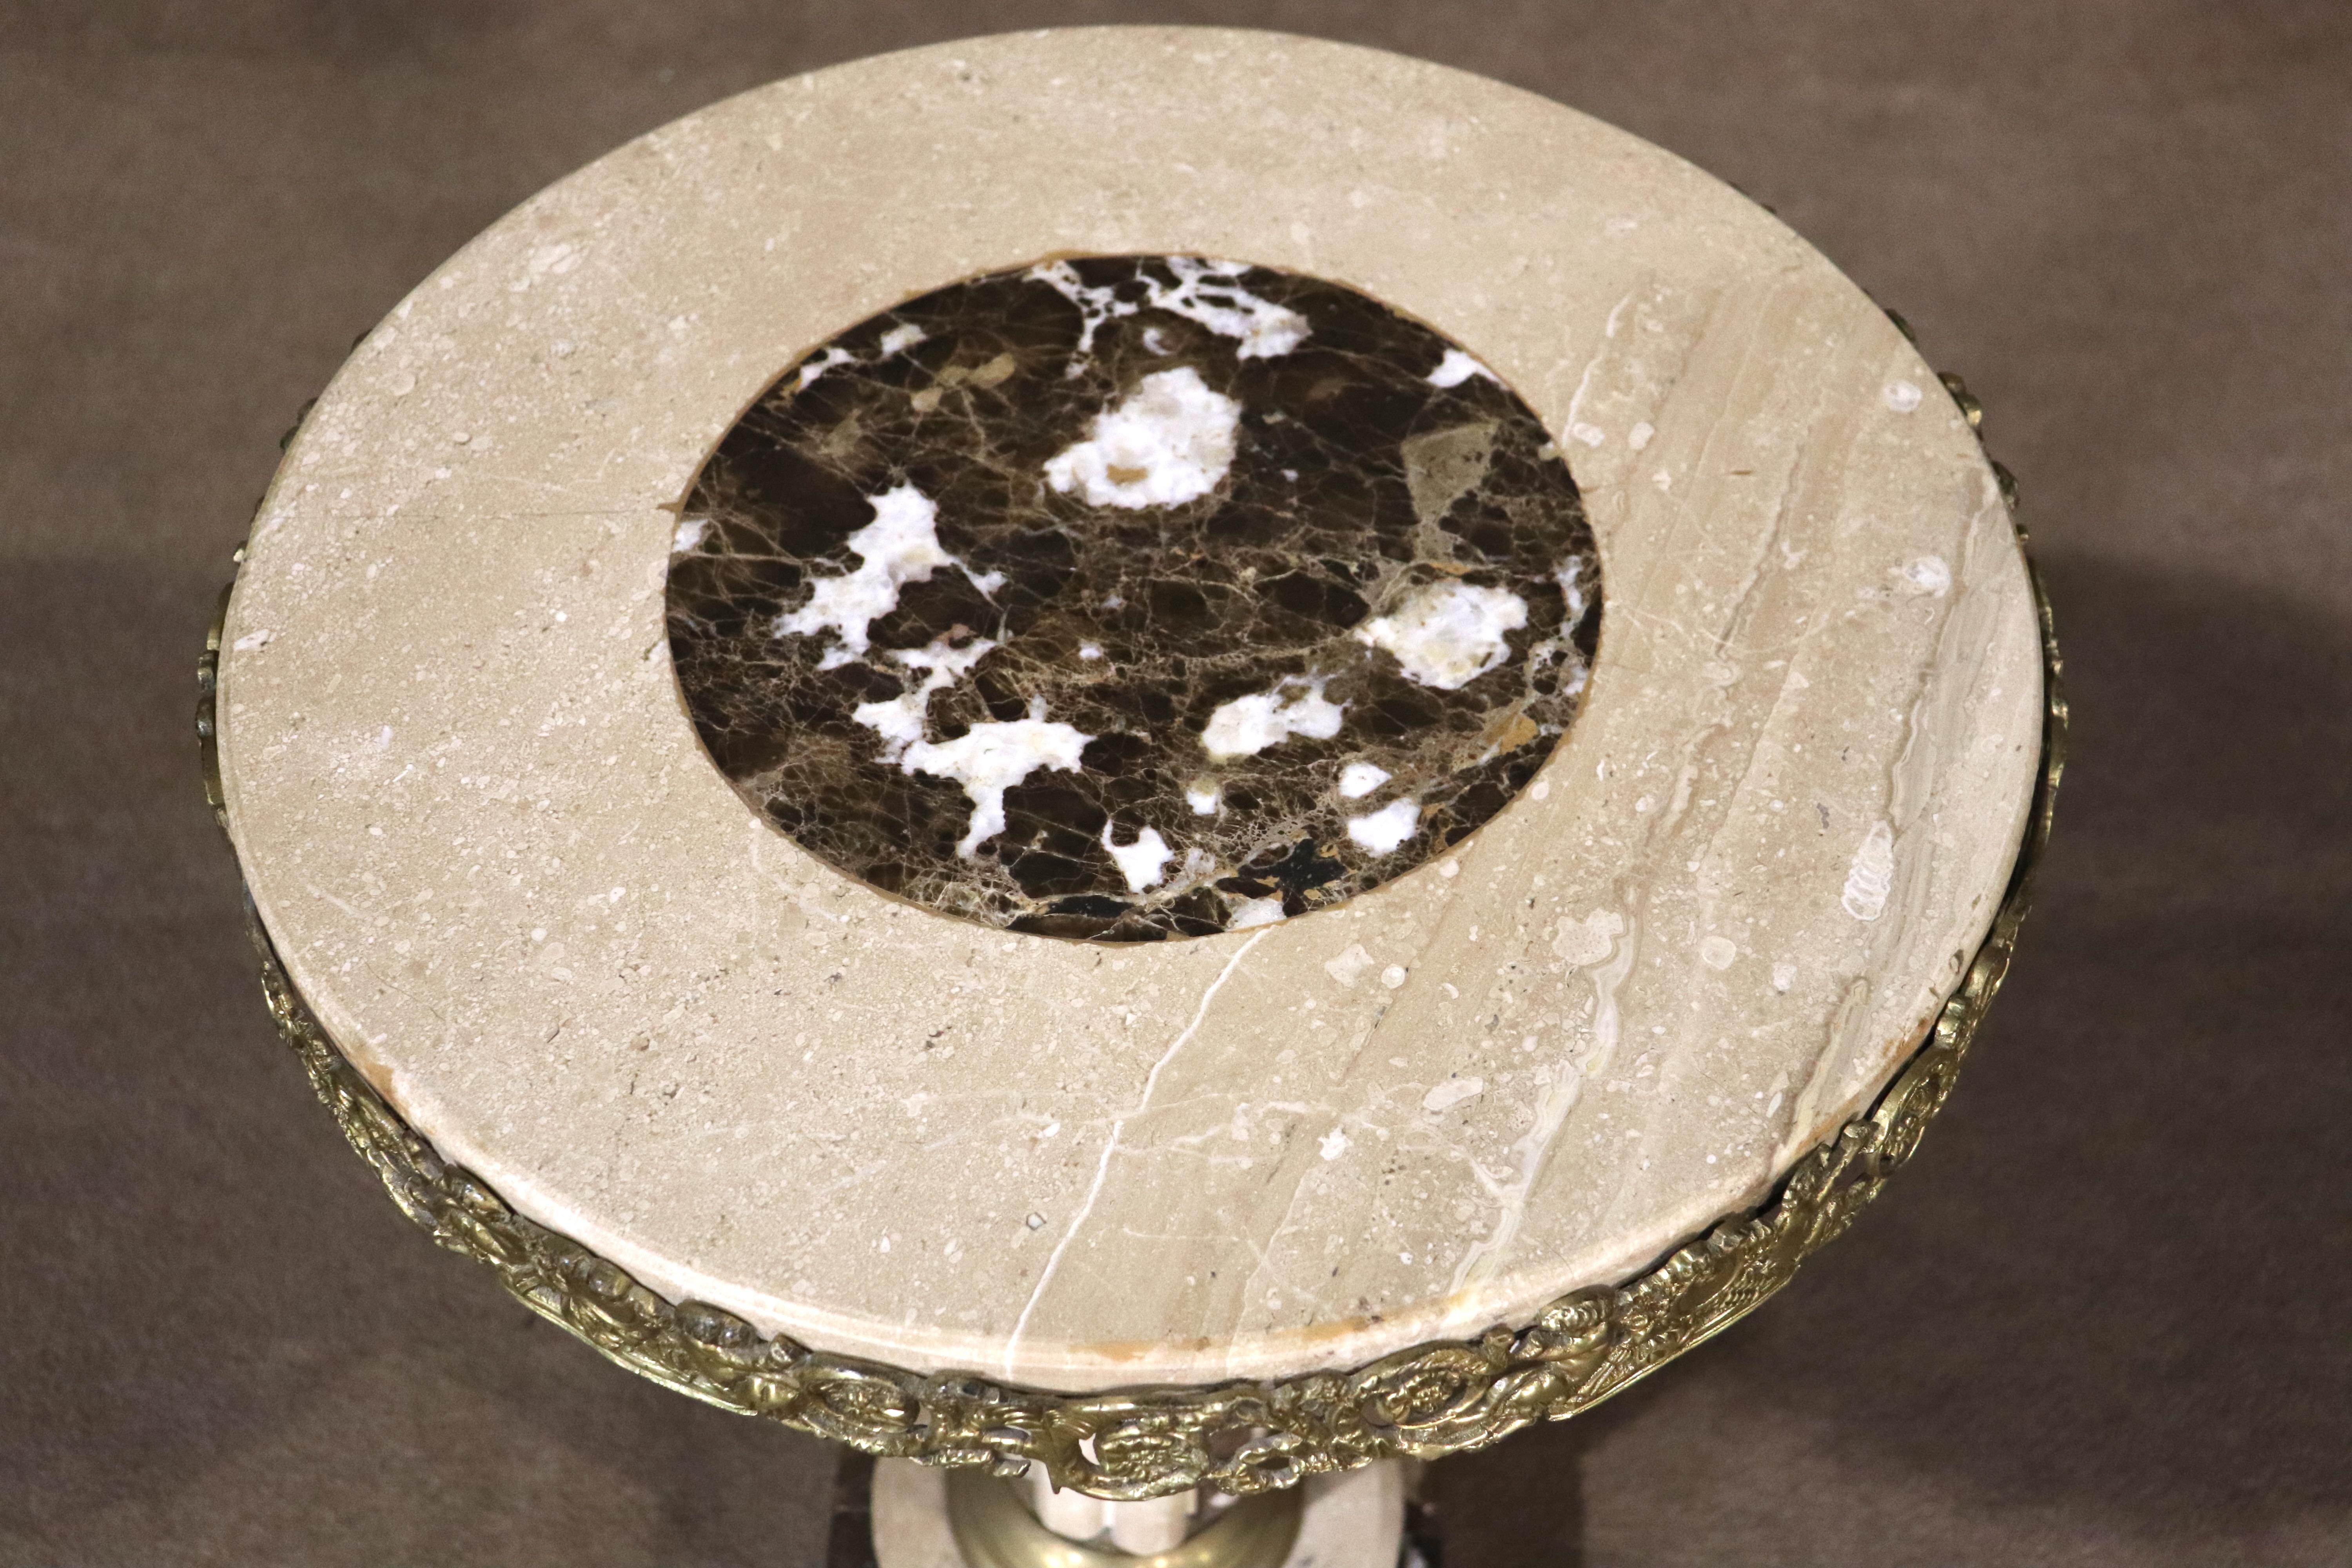 Round marble pedestal table with Greek column and brass trim.
Please confirm location NY or NJ